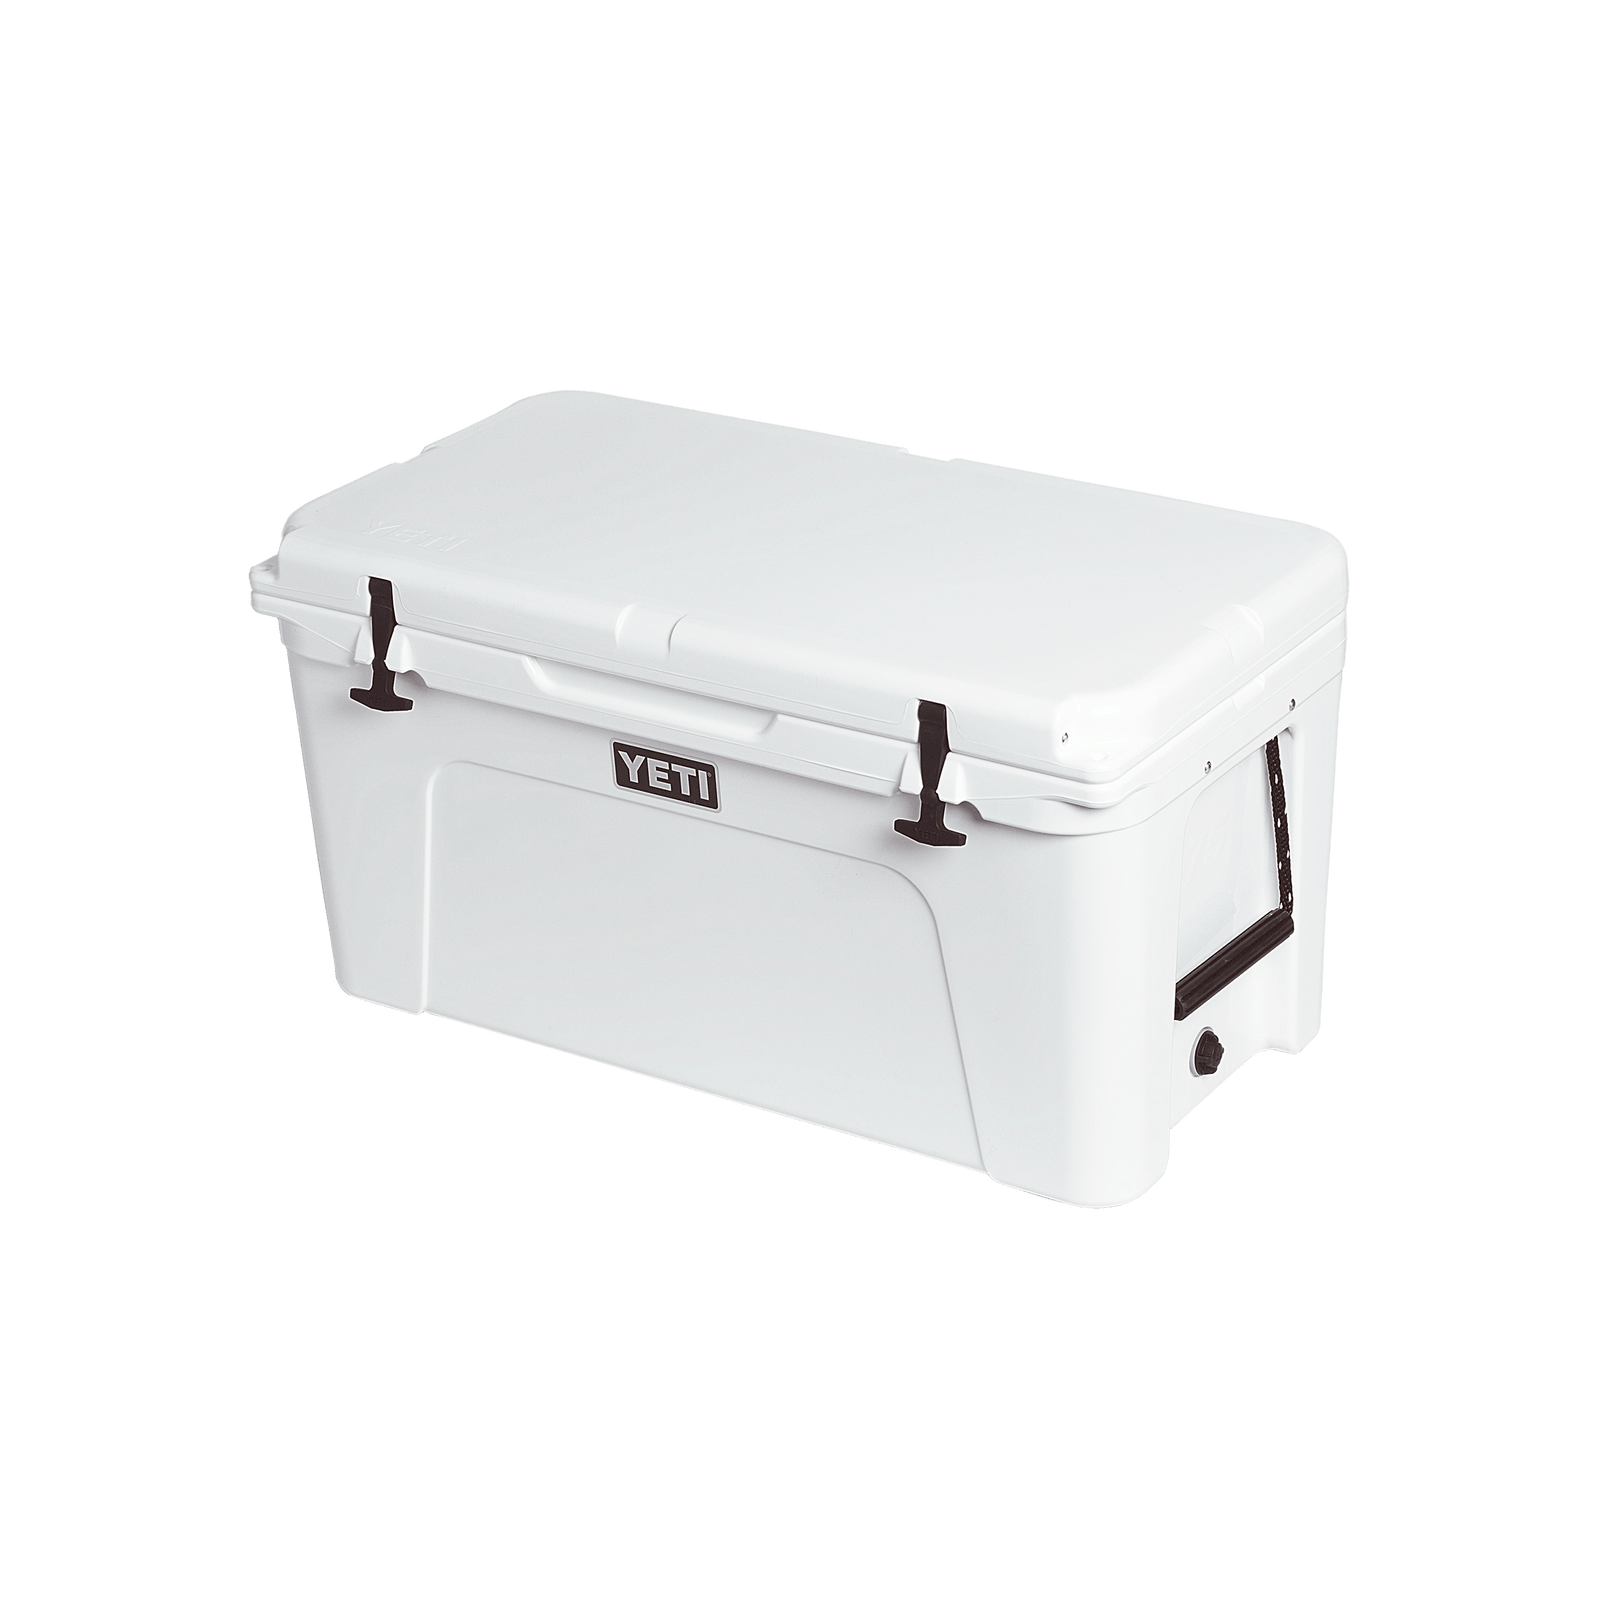 Cooler cushion compatiable with YETI TUNDRA 75